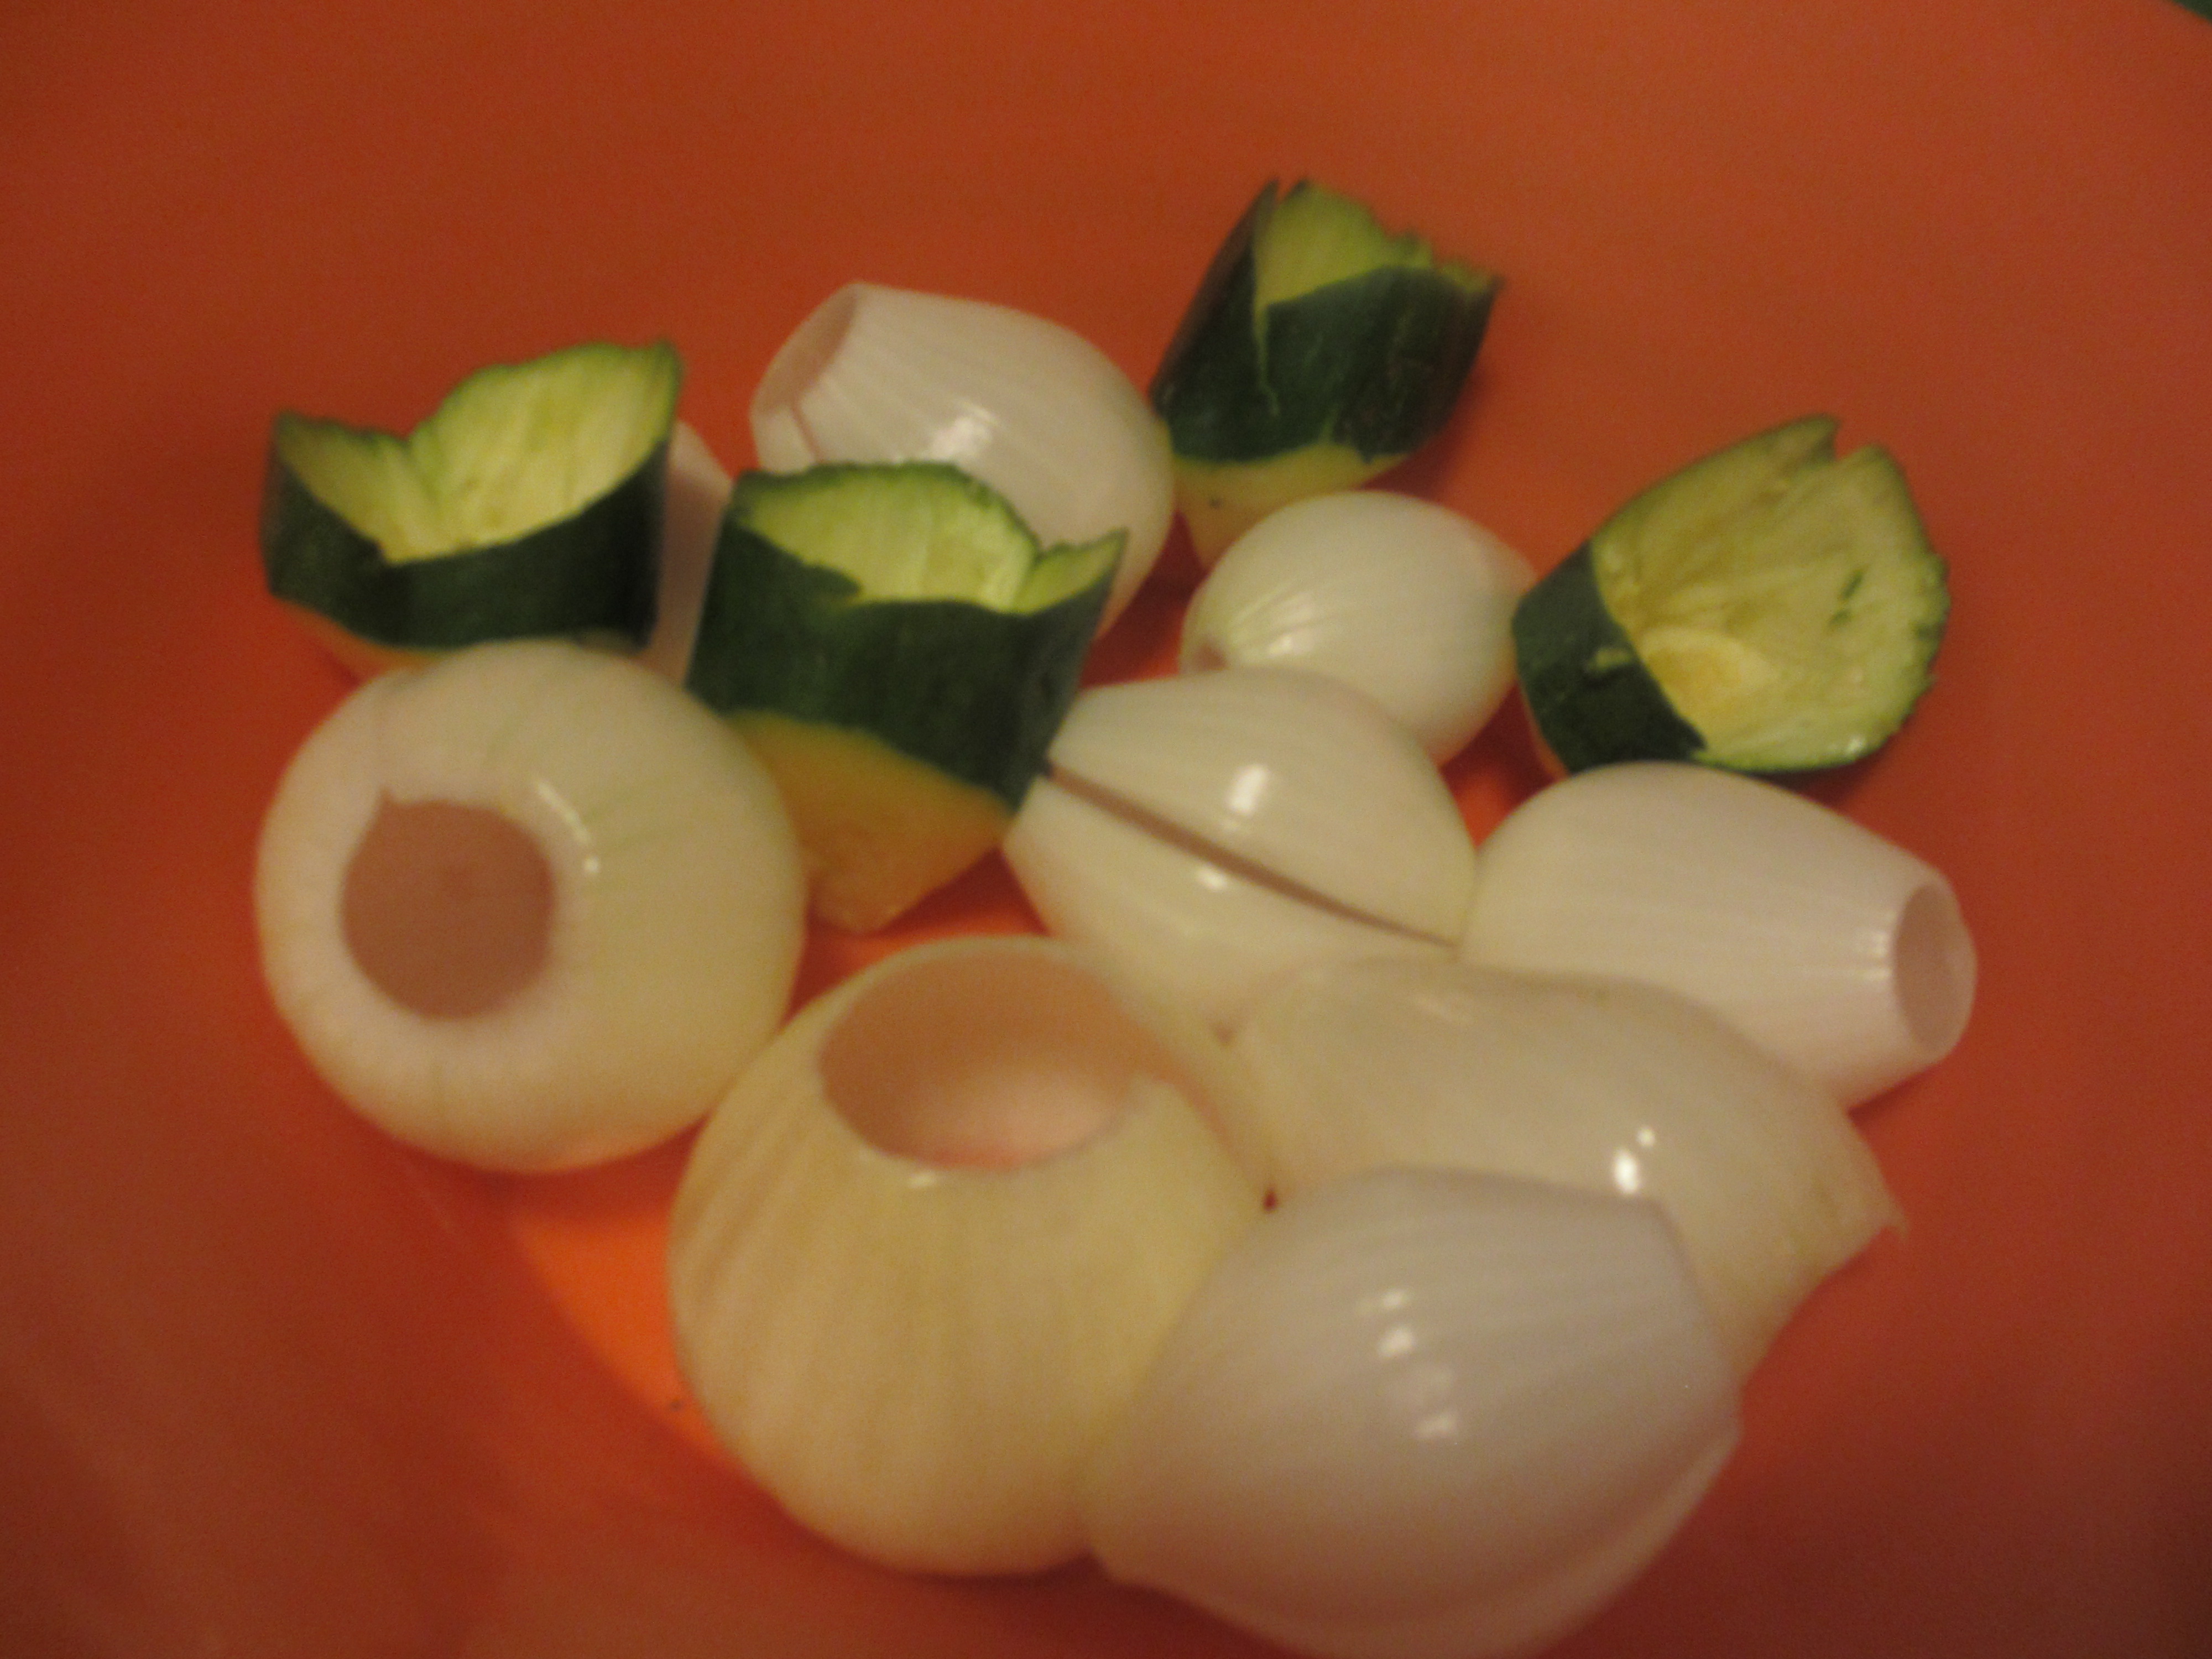 Peeled onions and sliced zucchini